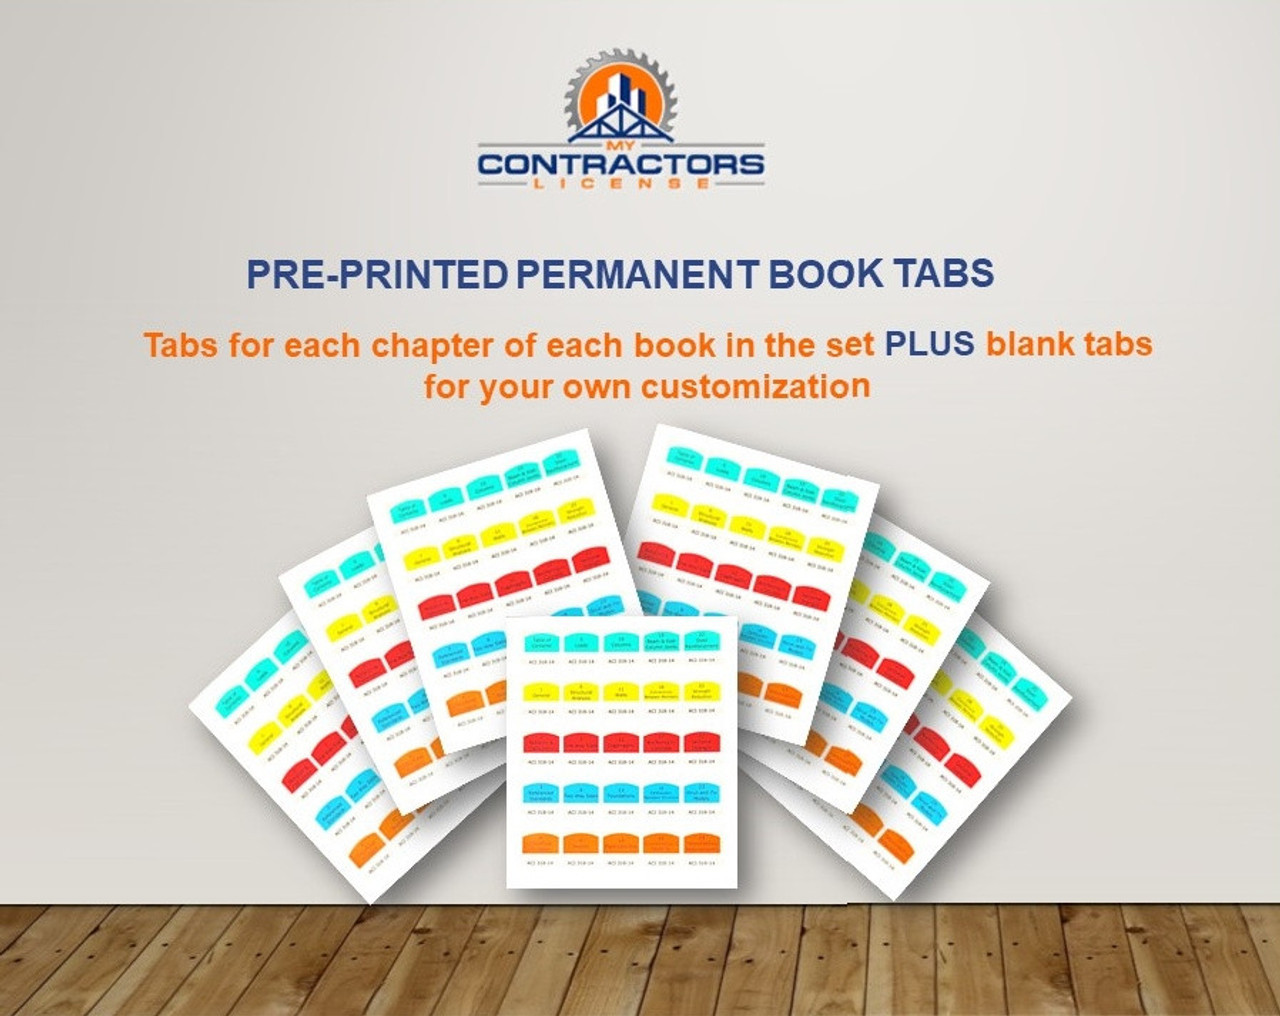 NM GS-7 Drywall Installation Pre-Printed Book Tabs